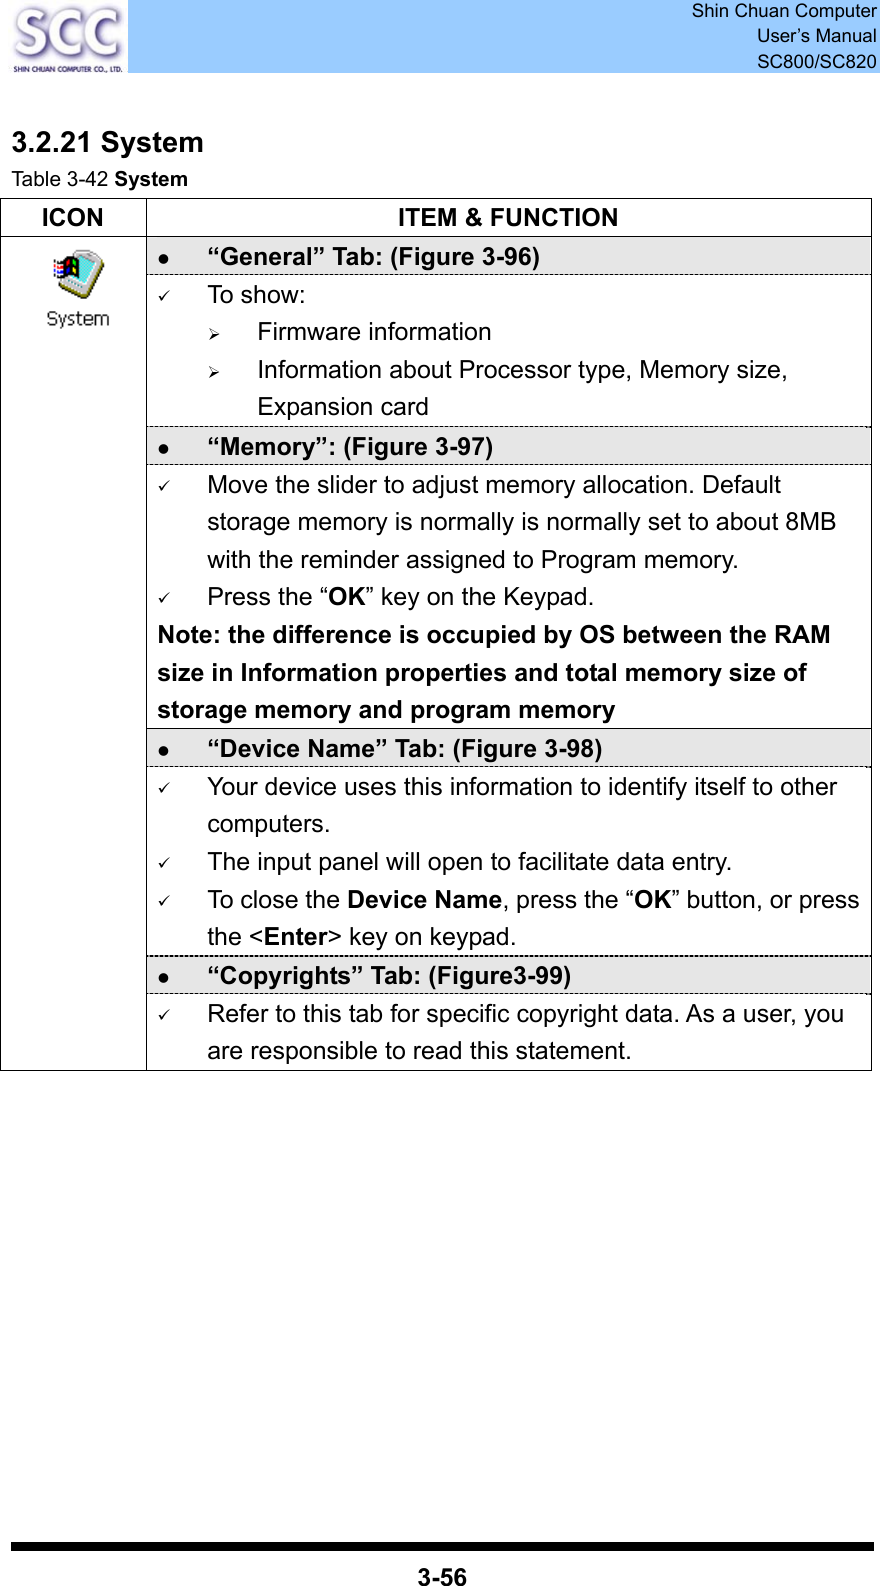  Shin Chuan Computer User’s Manual SC800/SC820  3-56  3.2.21 System Table 3-42 System ICON  ITEM &amp; FUNCTION z “General” Tab: (Figure 3-96) 9 To show: ¾ Firmware information   ¾ Information about Processor type, Memory size, Expansion card z “Memory”: (Figure 3-97) 9 Move the slider to adjust memory allocation. Default storage memory is normally is normally set to about 8MB with the reminder assigned to Program memory. 9 Press the “OK” key on the Keypad.   Note: the difference is occupied by OS between the RAM size in Information properties and total memory size of storage memory and program memory   z “Device Name” Tab: (Figure 3-98) 9 Your device uses this information to identify itself to other computers. 9 The input panel will open to facilitate data entry. 9 To close the Device Name, press the “OK” button, or press the &lt;Enter&gt; key on keypad. z “Copyrights” Tab: (Figure3-99)  9 Refer to this tab for specific copyright data. As a user, you are responsible to read this statement.            